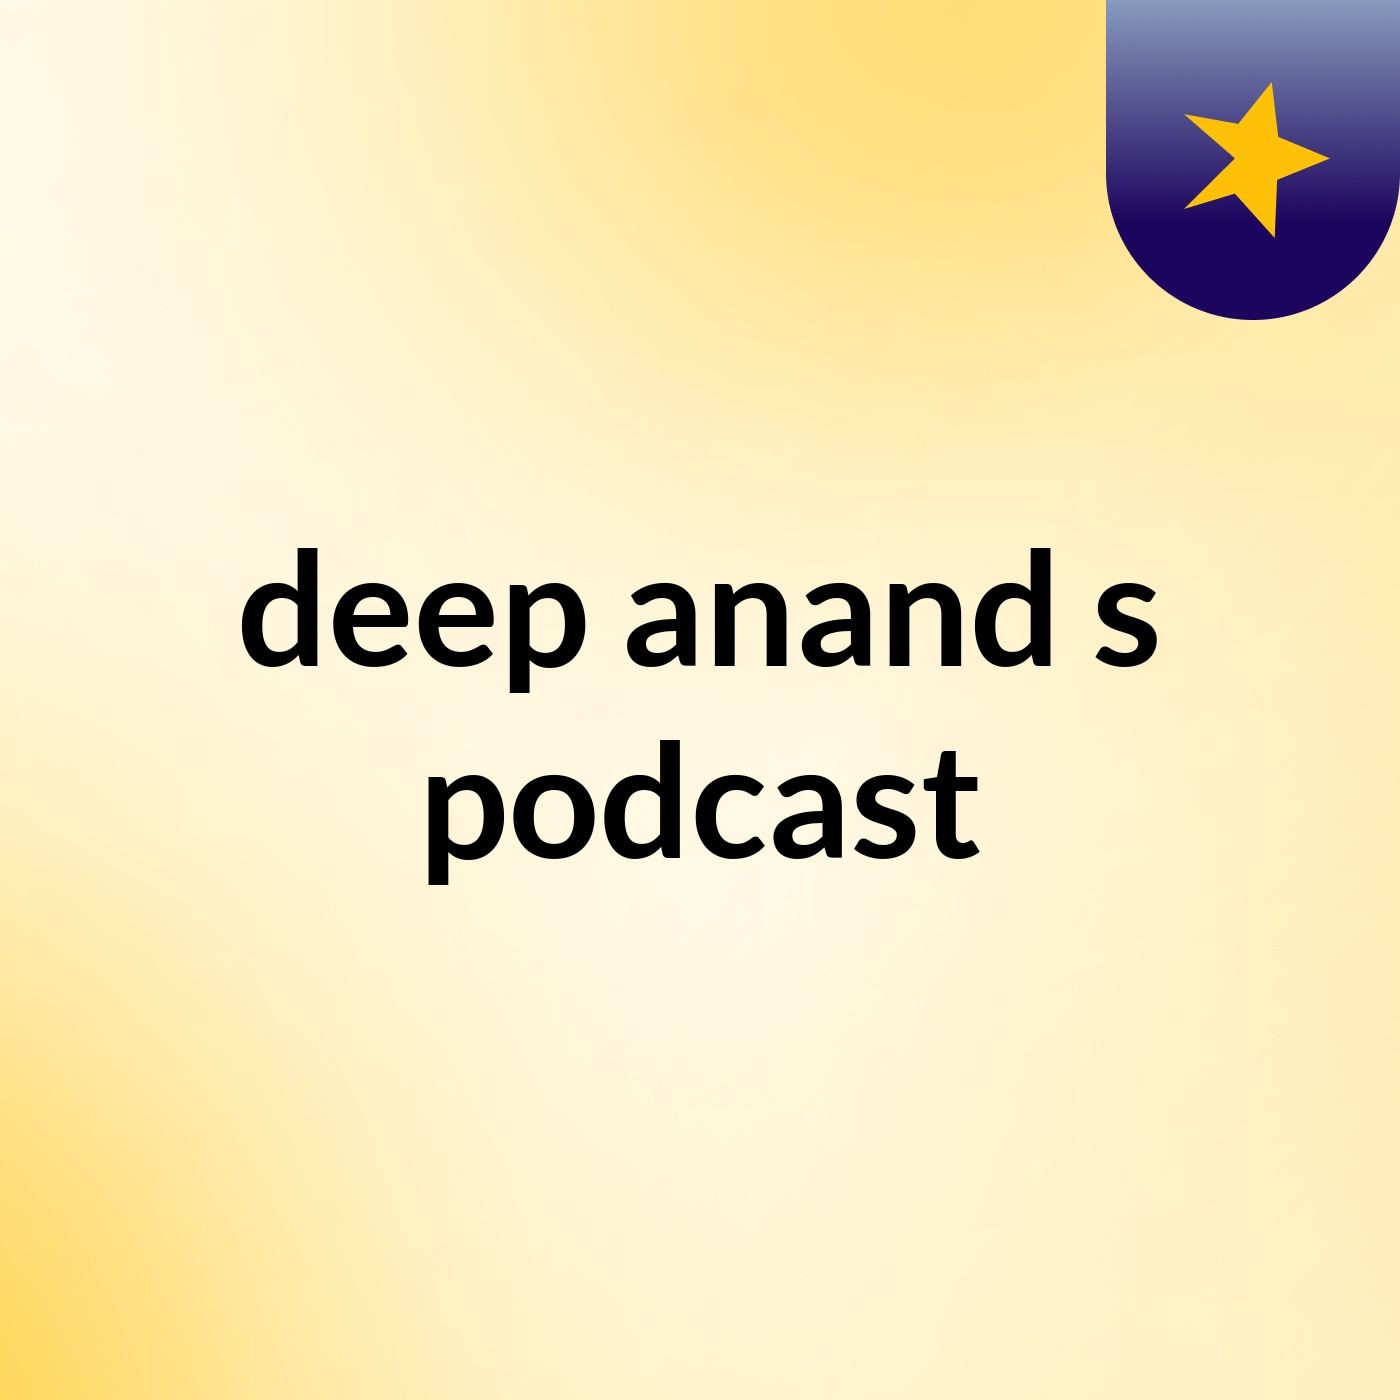 deep anand's podcast